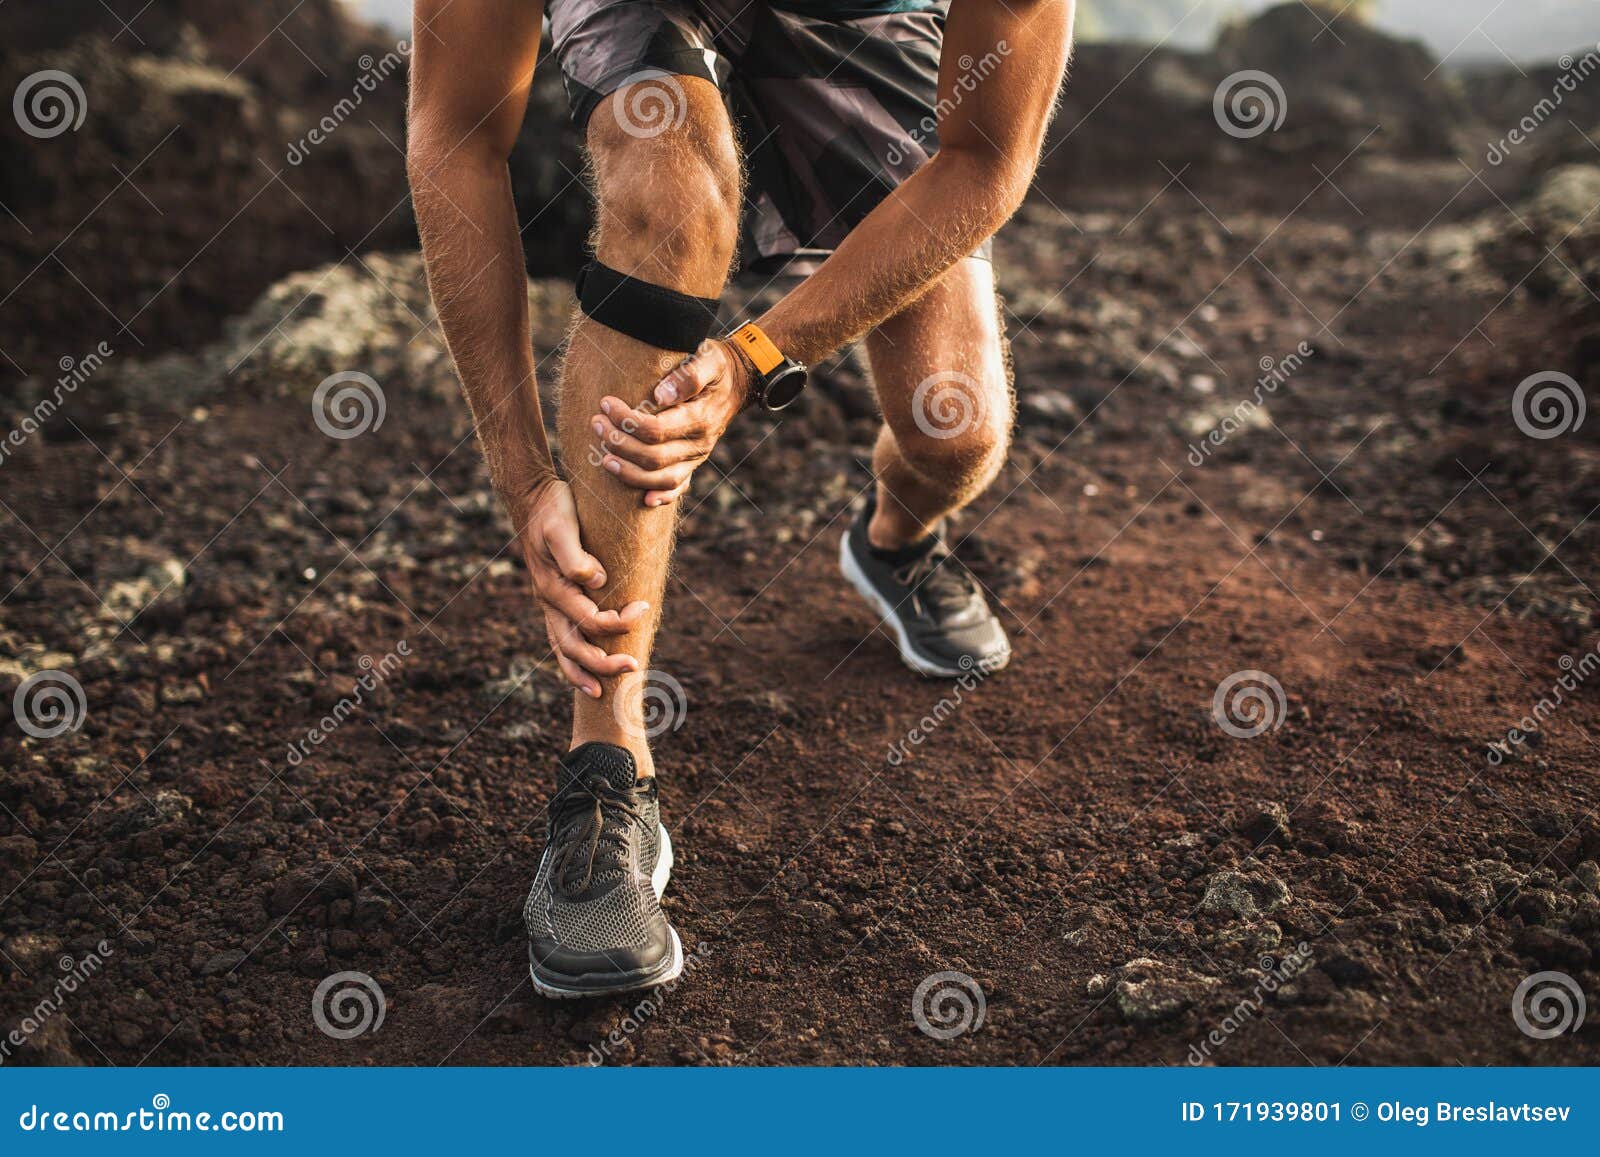 runner using knee support bandage with leg injury